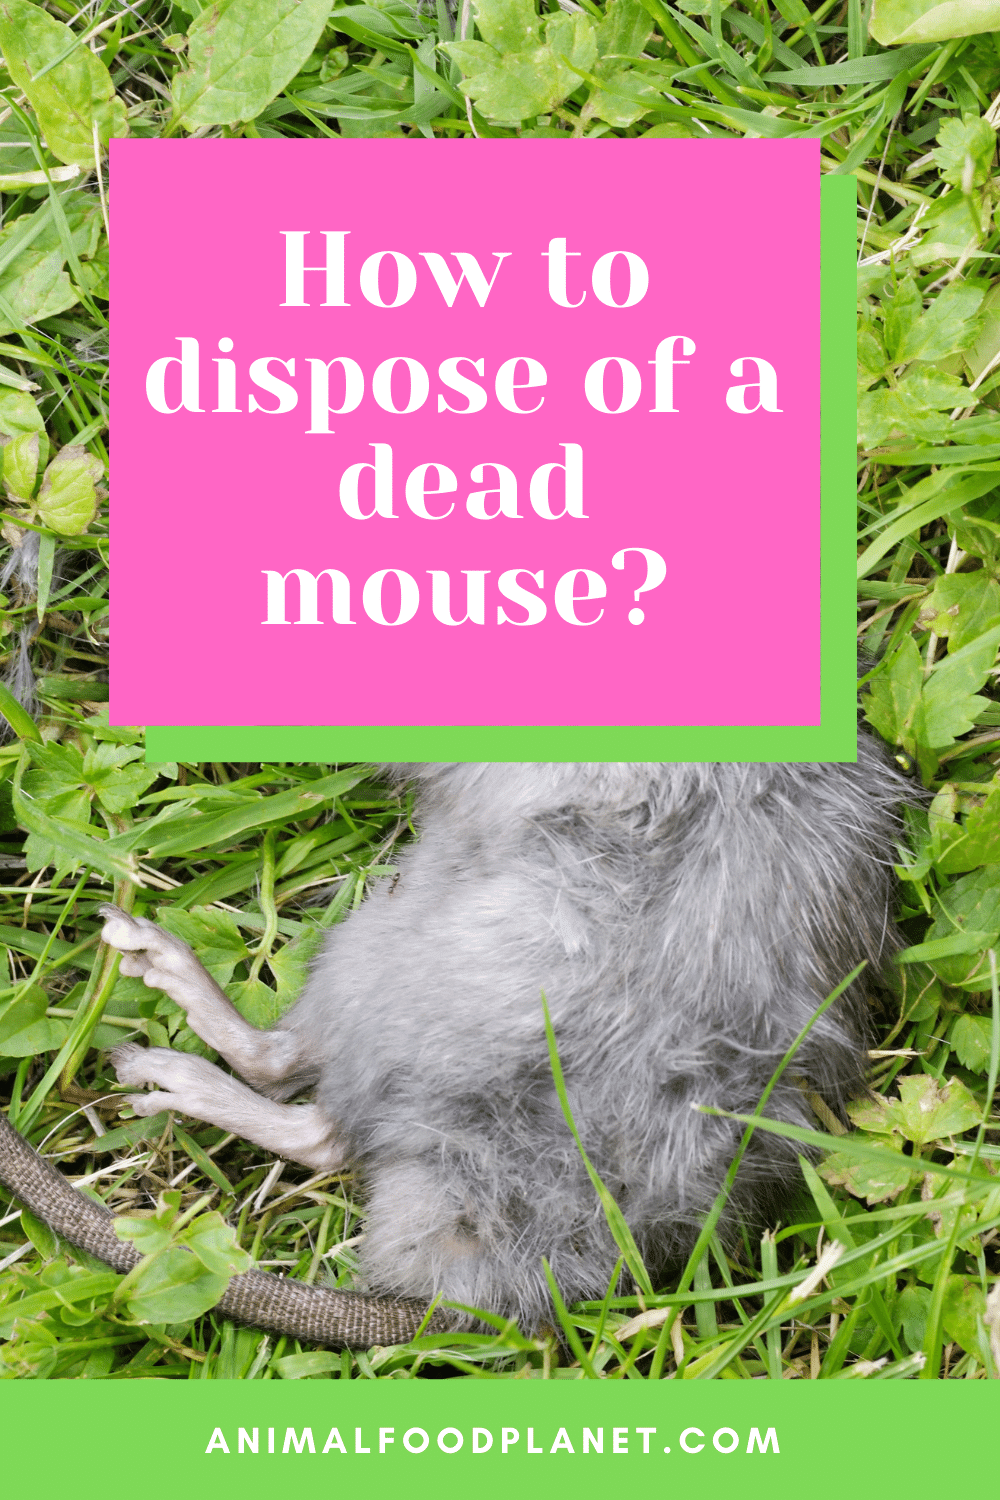 How to dispose of a dead mouse?